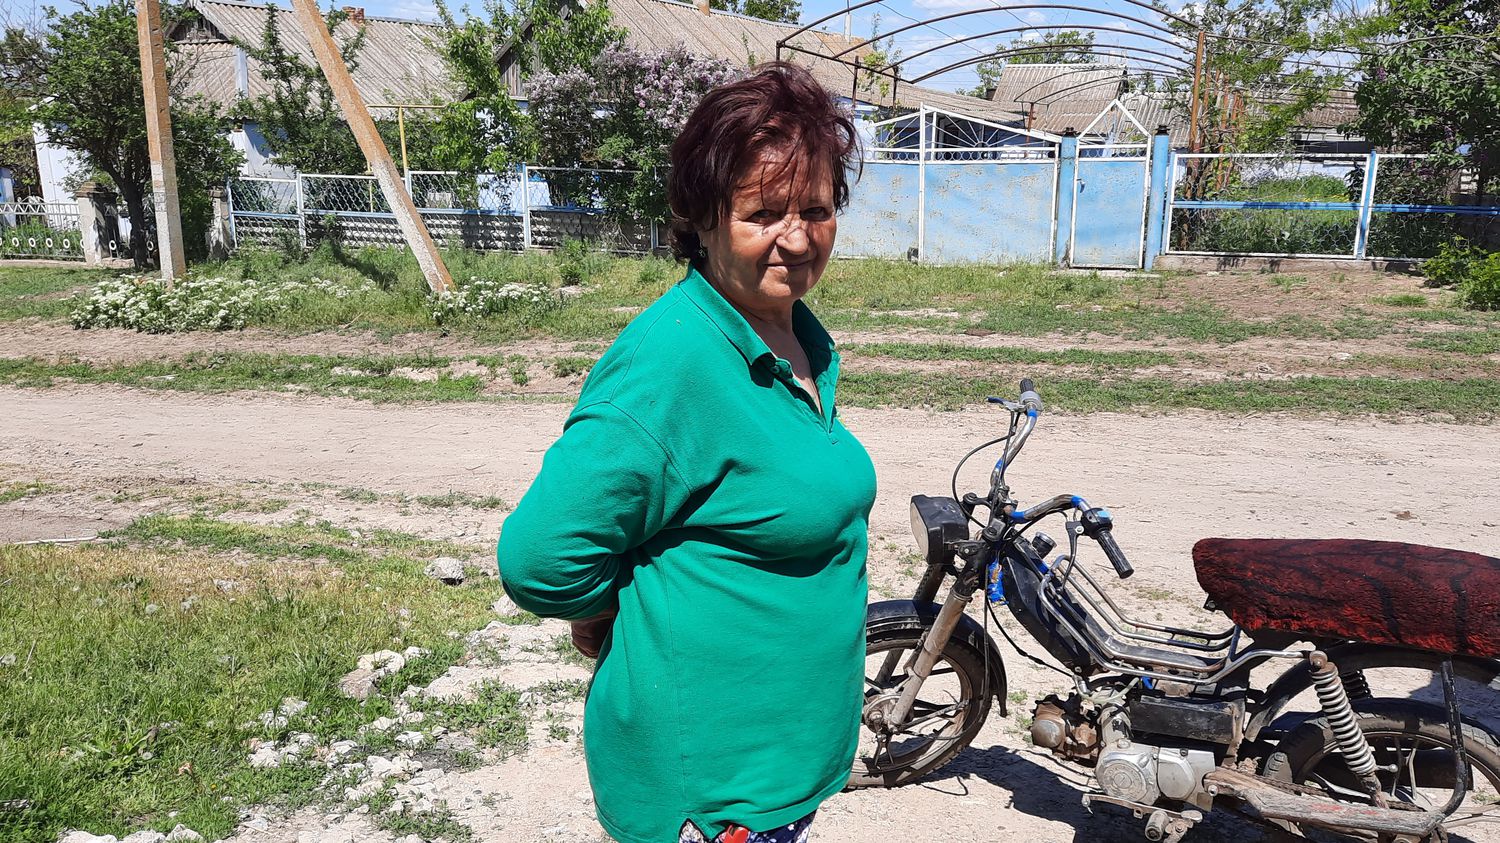 'When they left, he started crawling back to the village': In southern Ukraine, locals recount torture inflicted by Russian army
